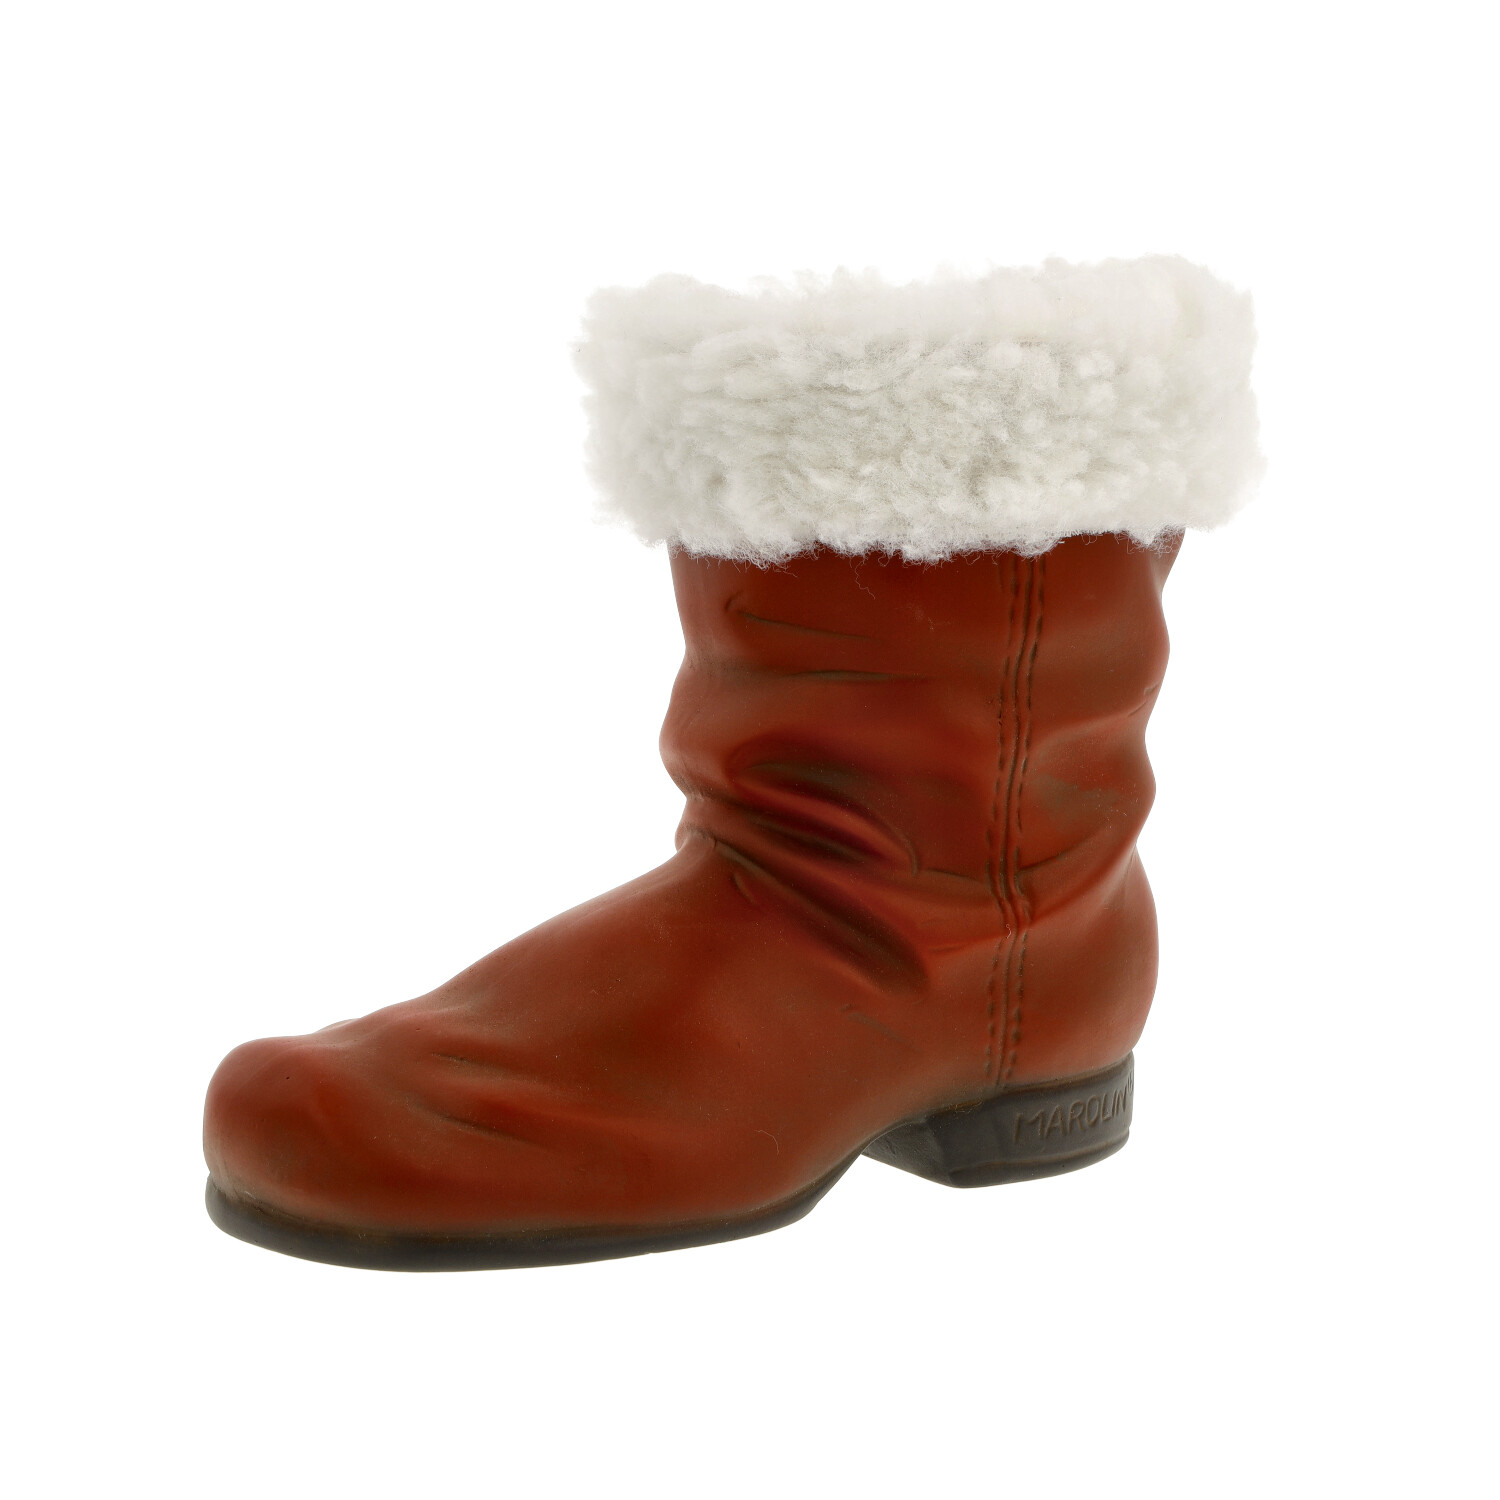 St. Nicholas boot with brim - Marolin Papermaché - made in Germany